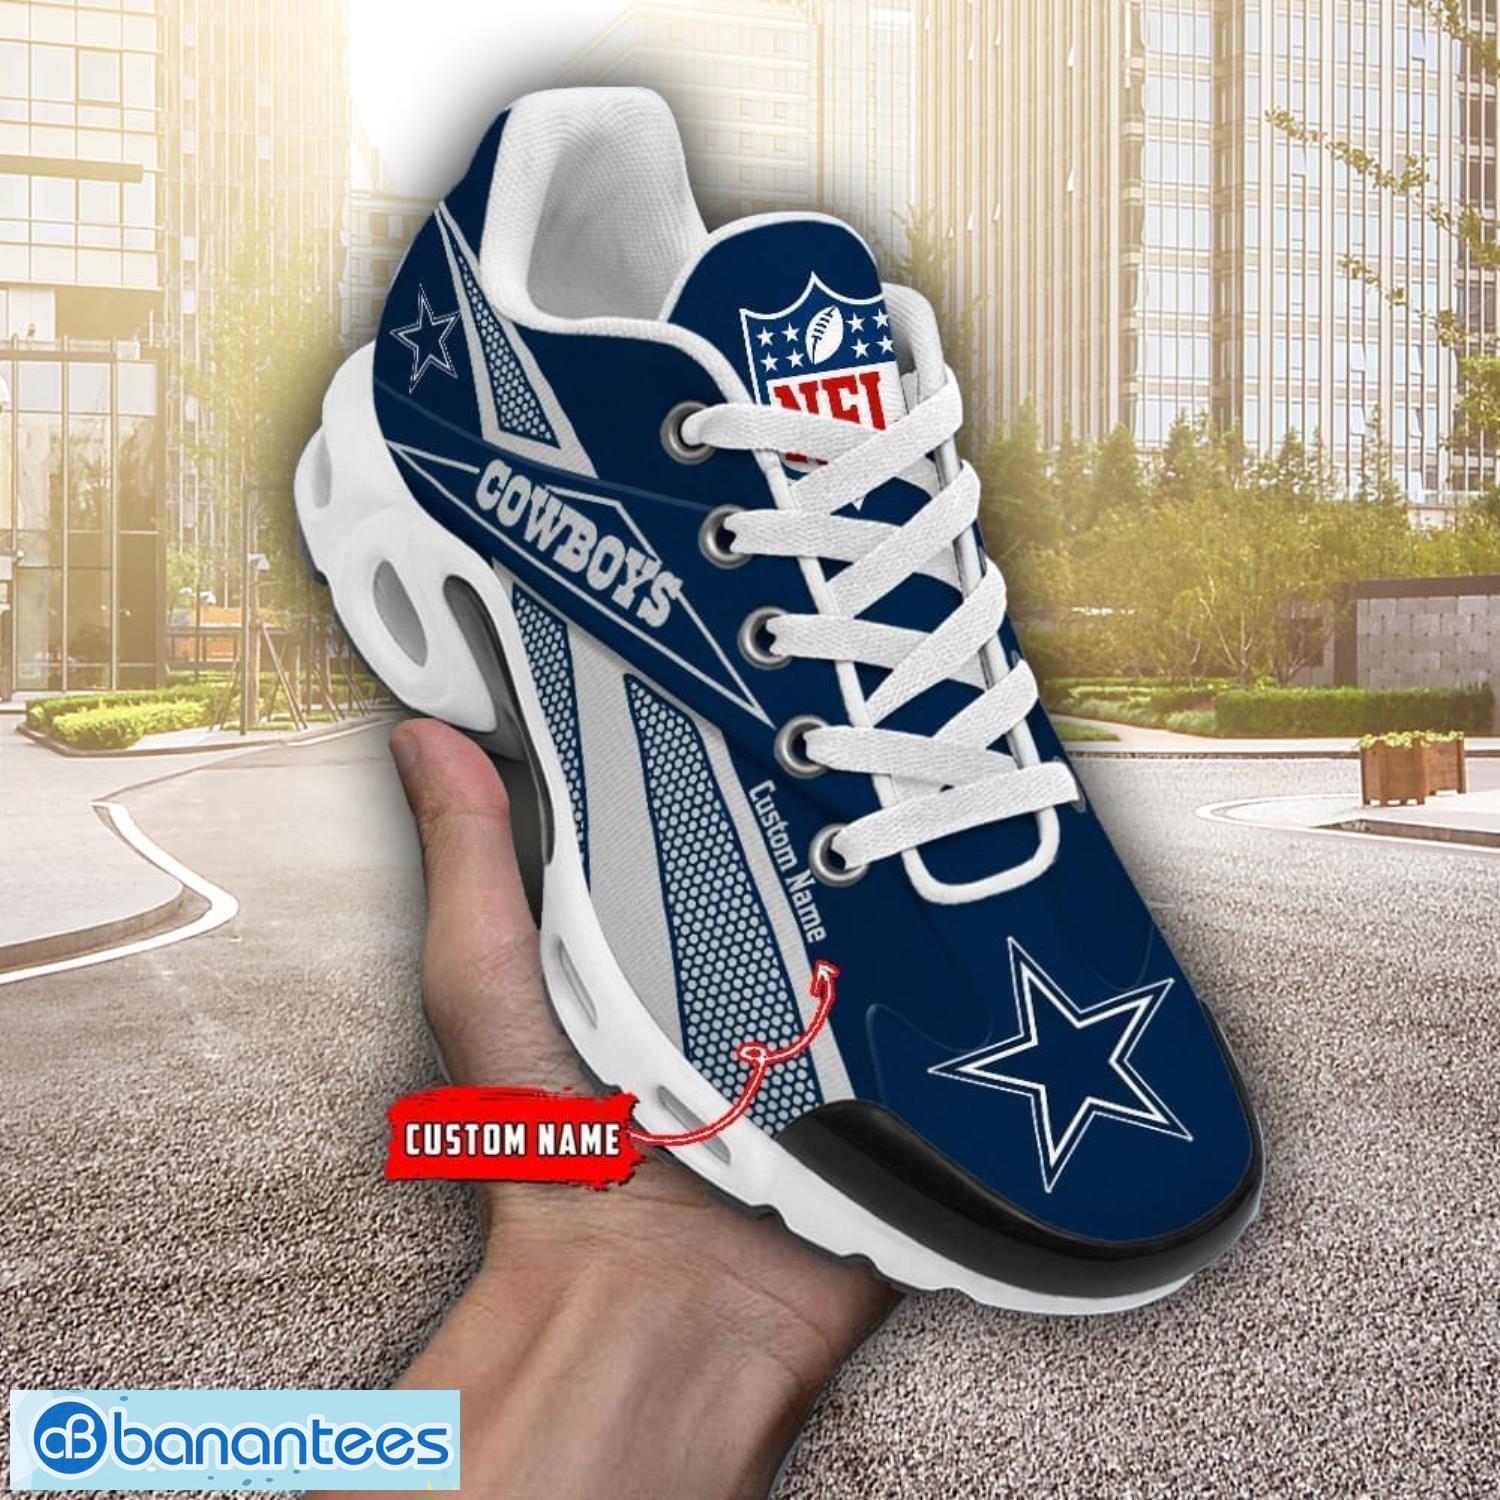 personalized name dallas cowboys air cushion sport shoes big fans gift tn shoes for men and women